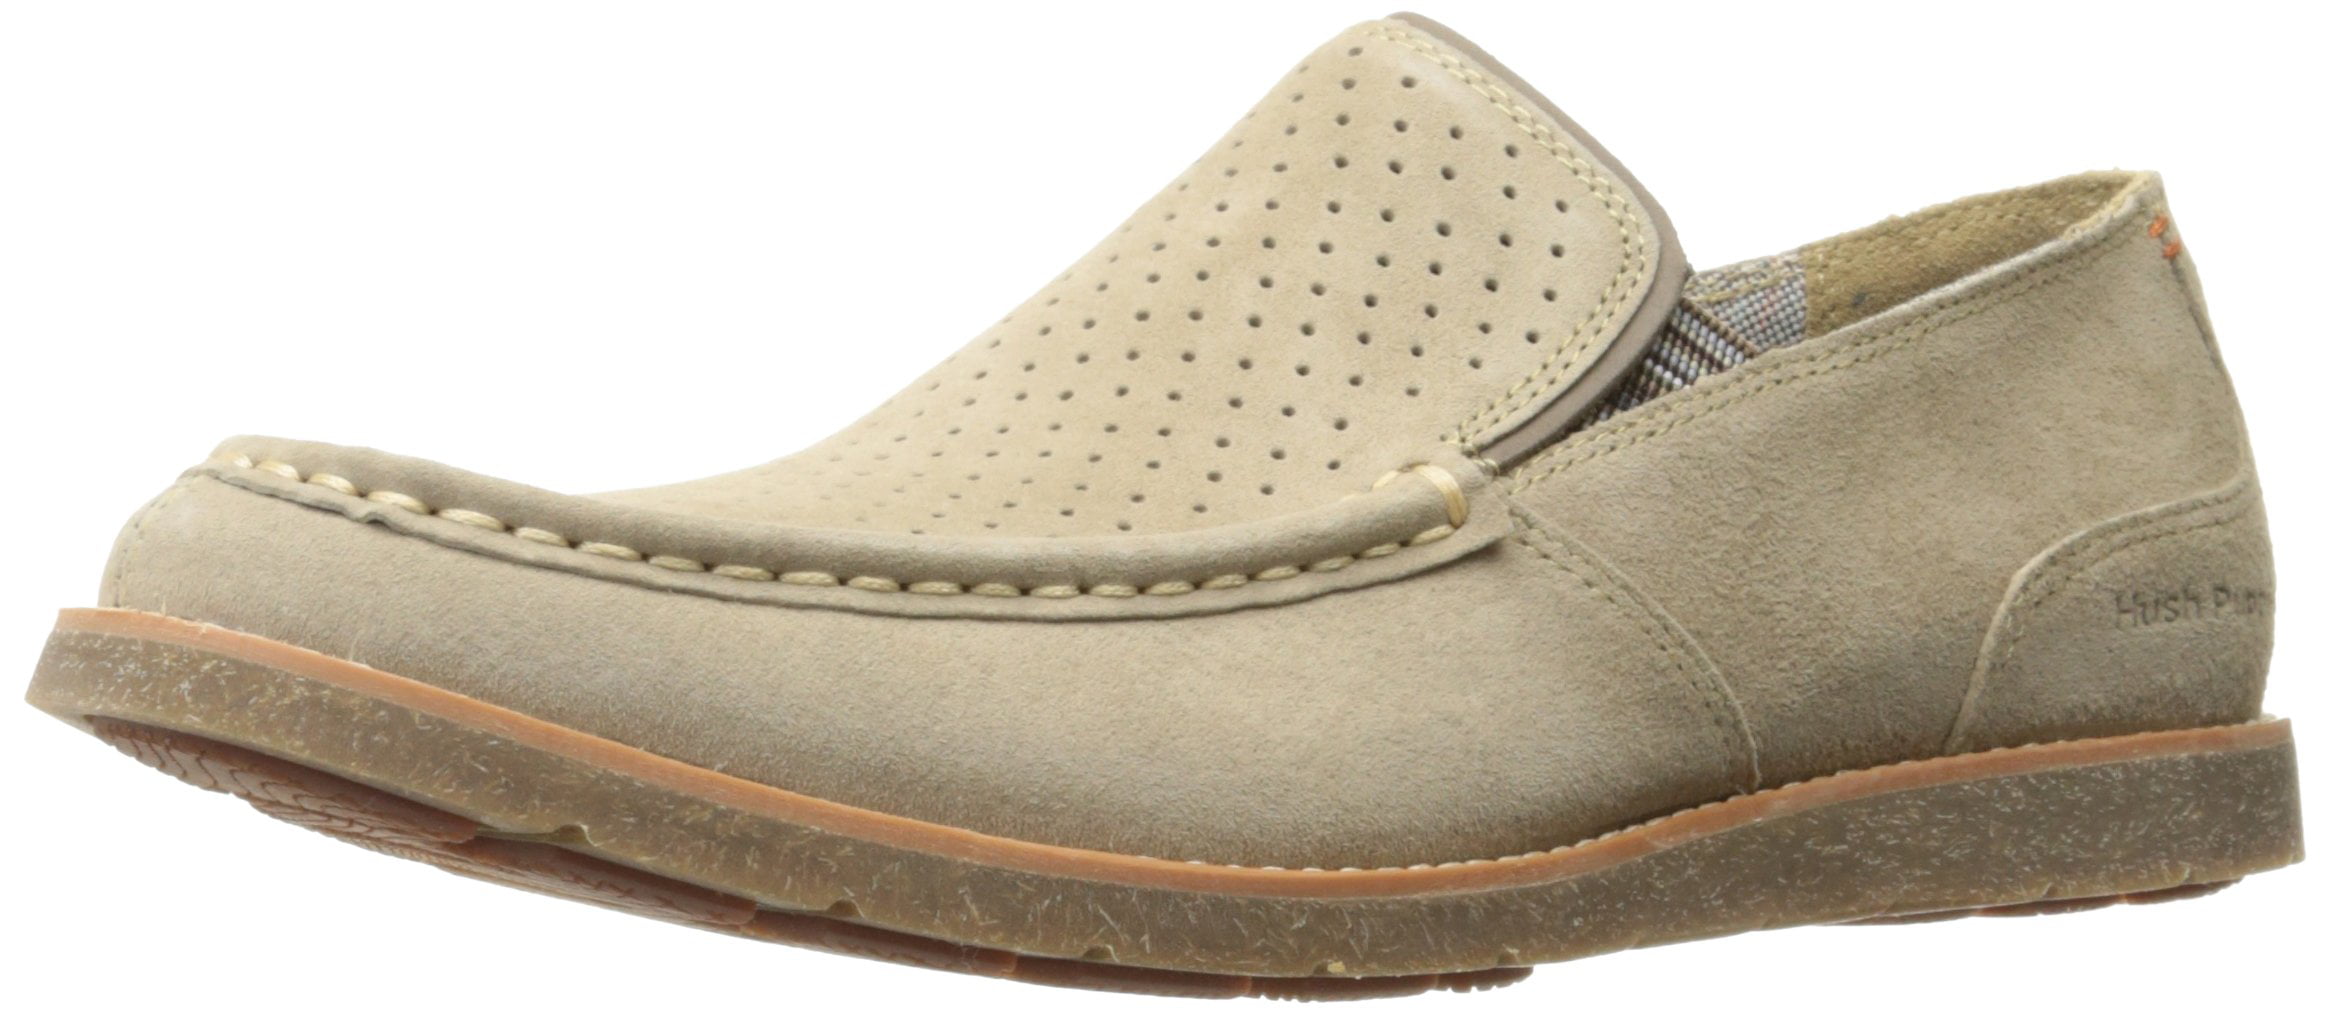 Hush Puppies HM01617-252 : Men's Lorens Jester Slip-on Loafer, Taupe ...